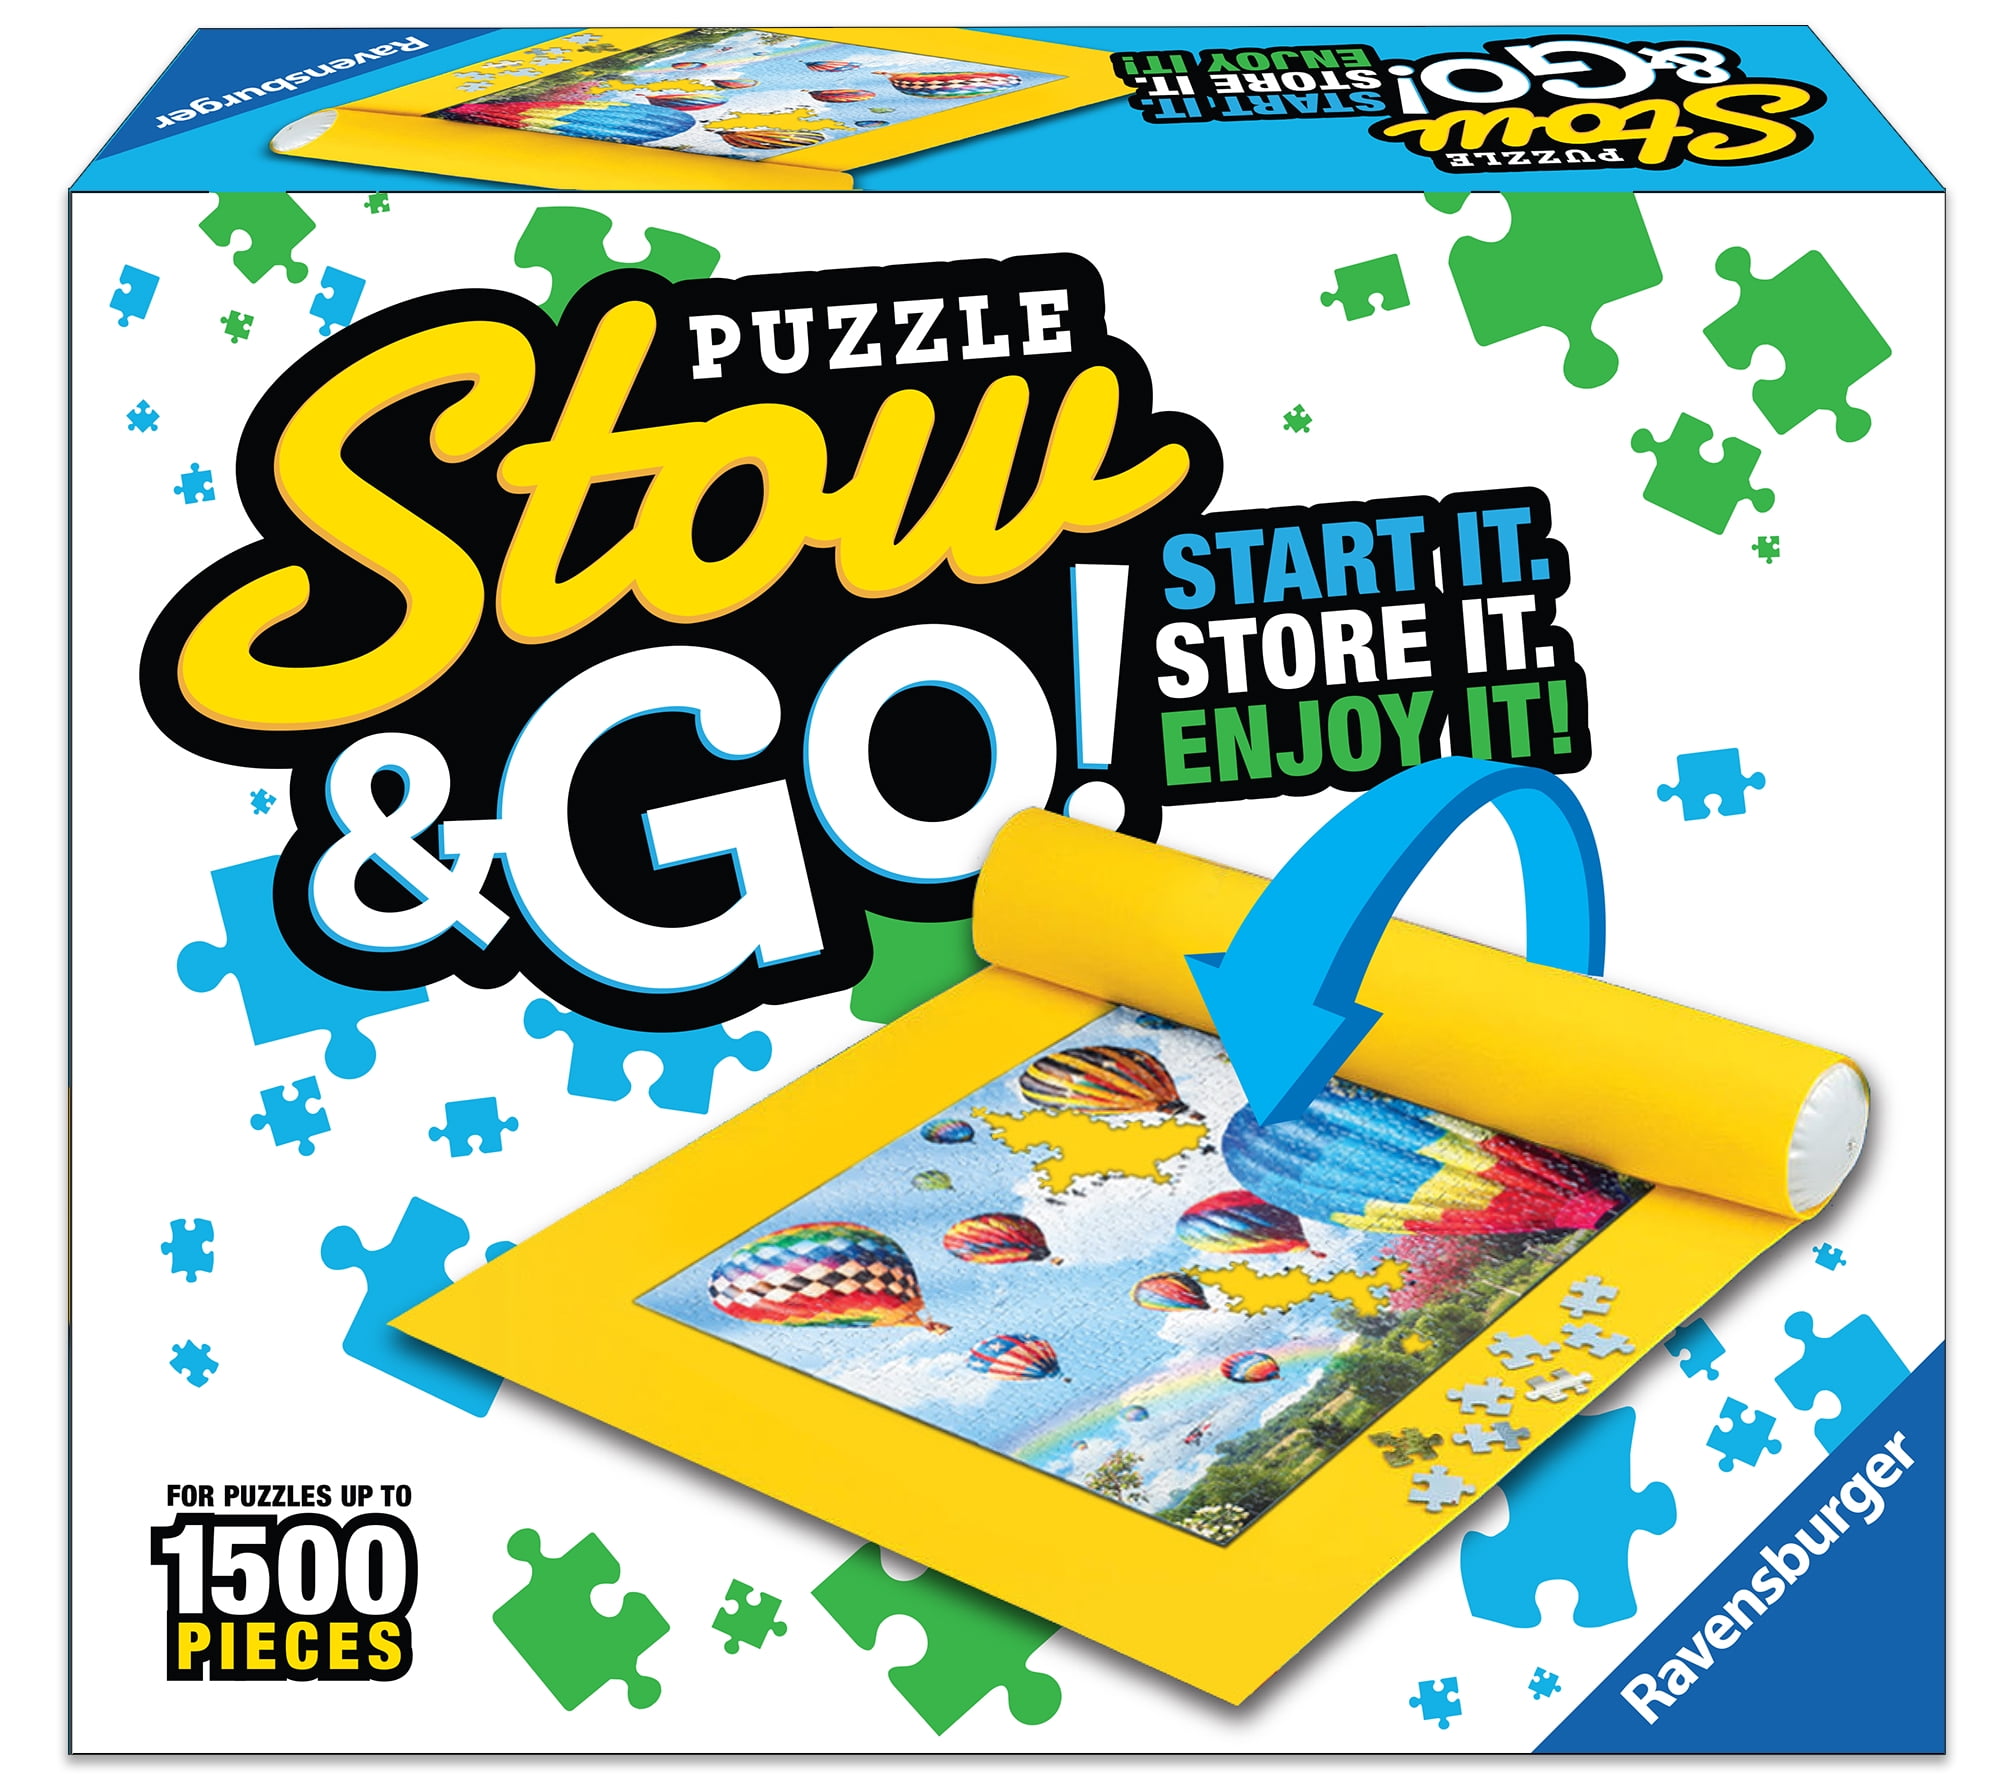 Ravensburger Stow & Go Puzzle Storage System – Stores Up to 1500 pieces ( Puzzles Not Included) 